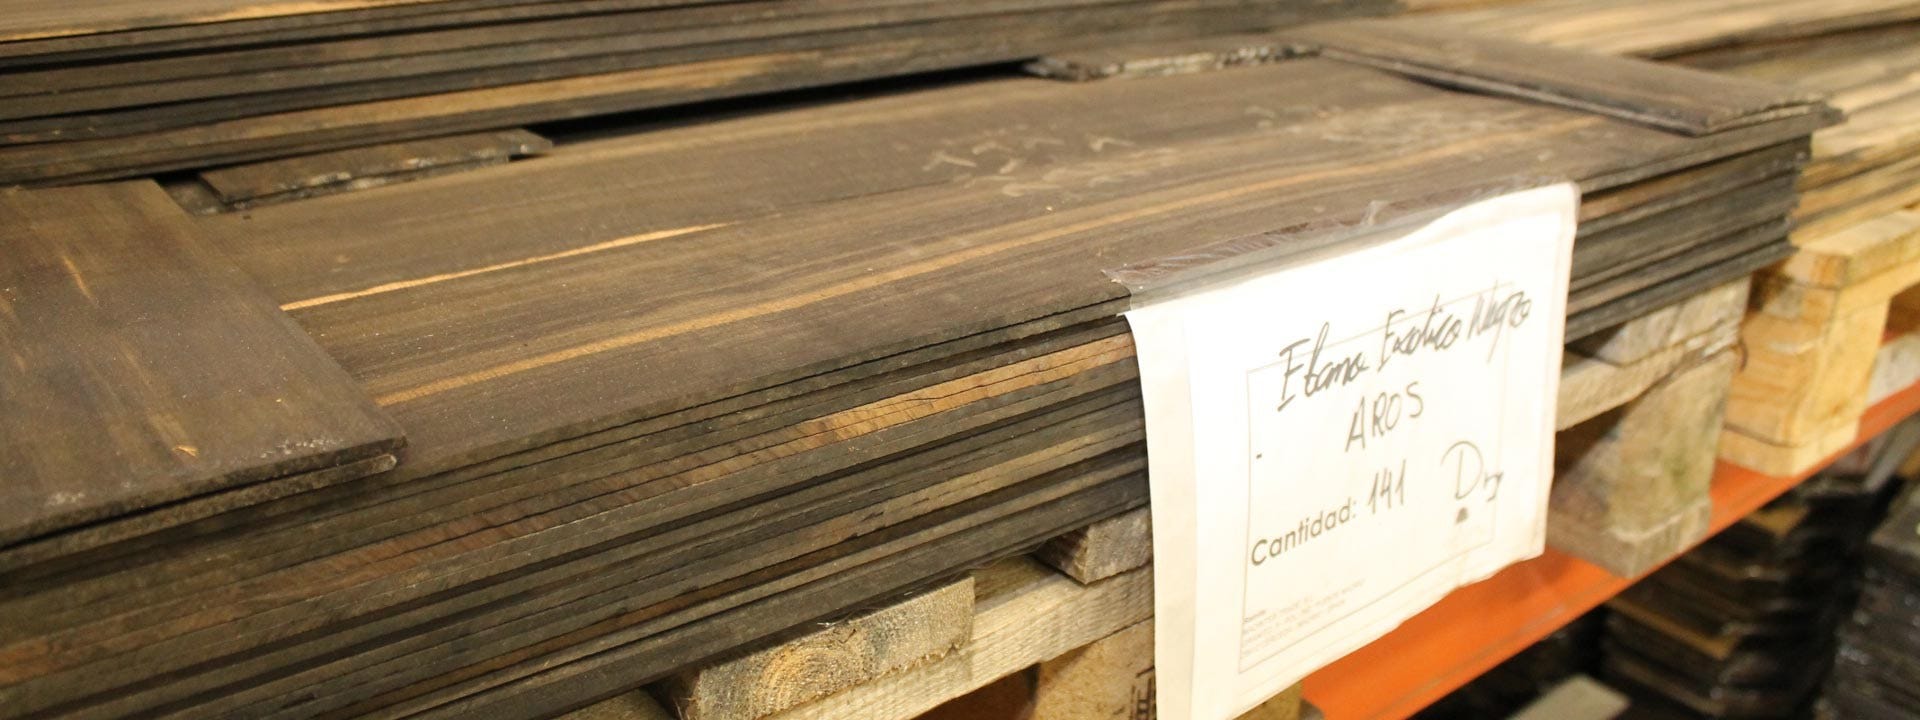 Timber for guitar production in Spain